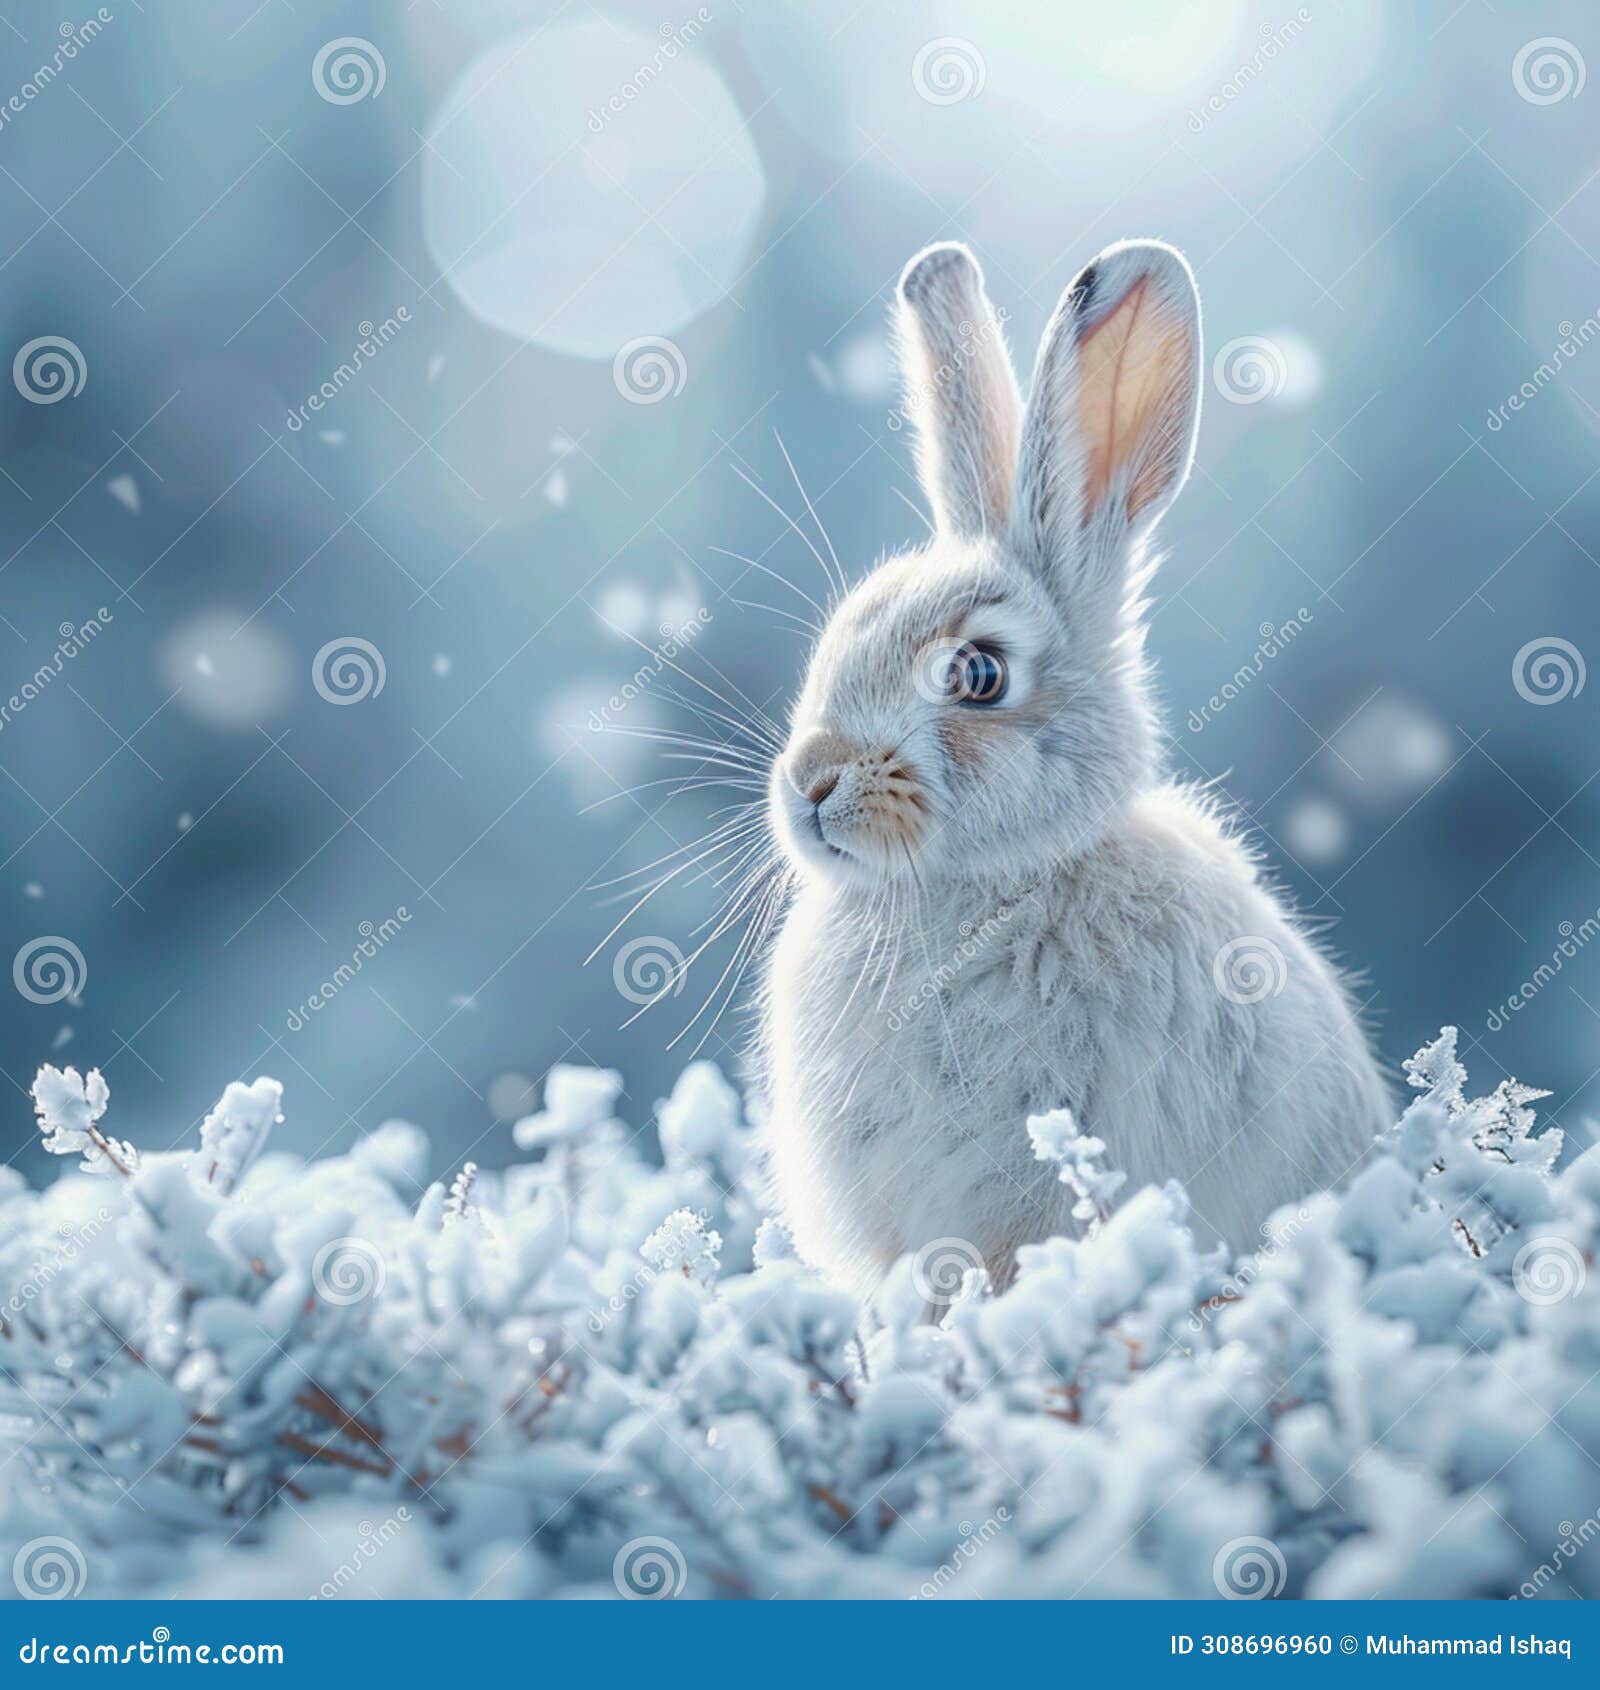 charming arctic hare against snowy backdrop, perfect for text inclusion